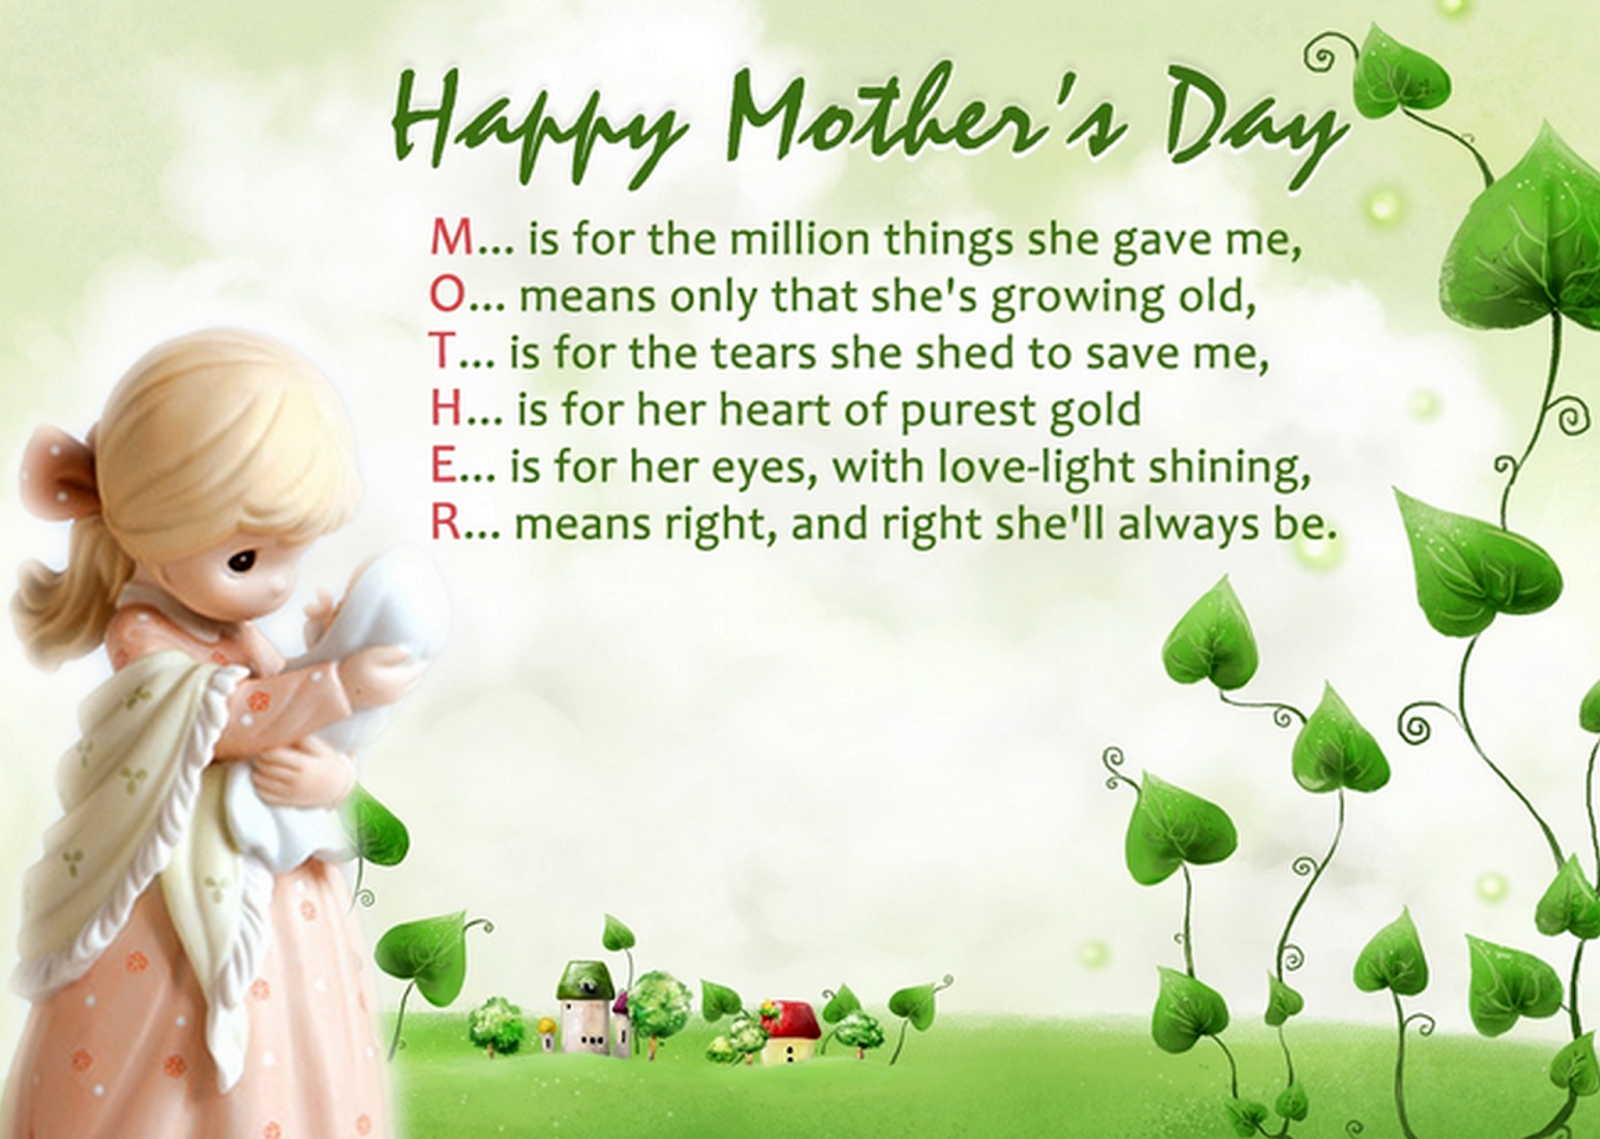 Happy Mothers Day Wallpaper Mothers Day Wallpaper Hd - Best Greeting Cards For Mother's Day - HD Wallpaper 